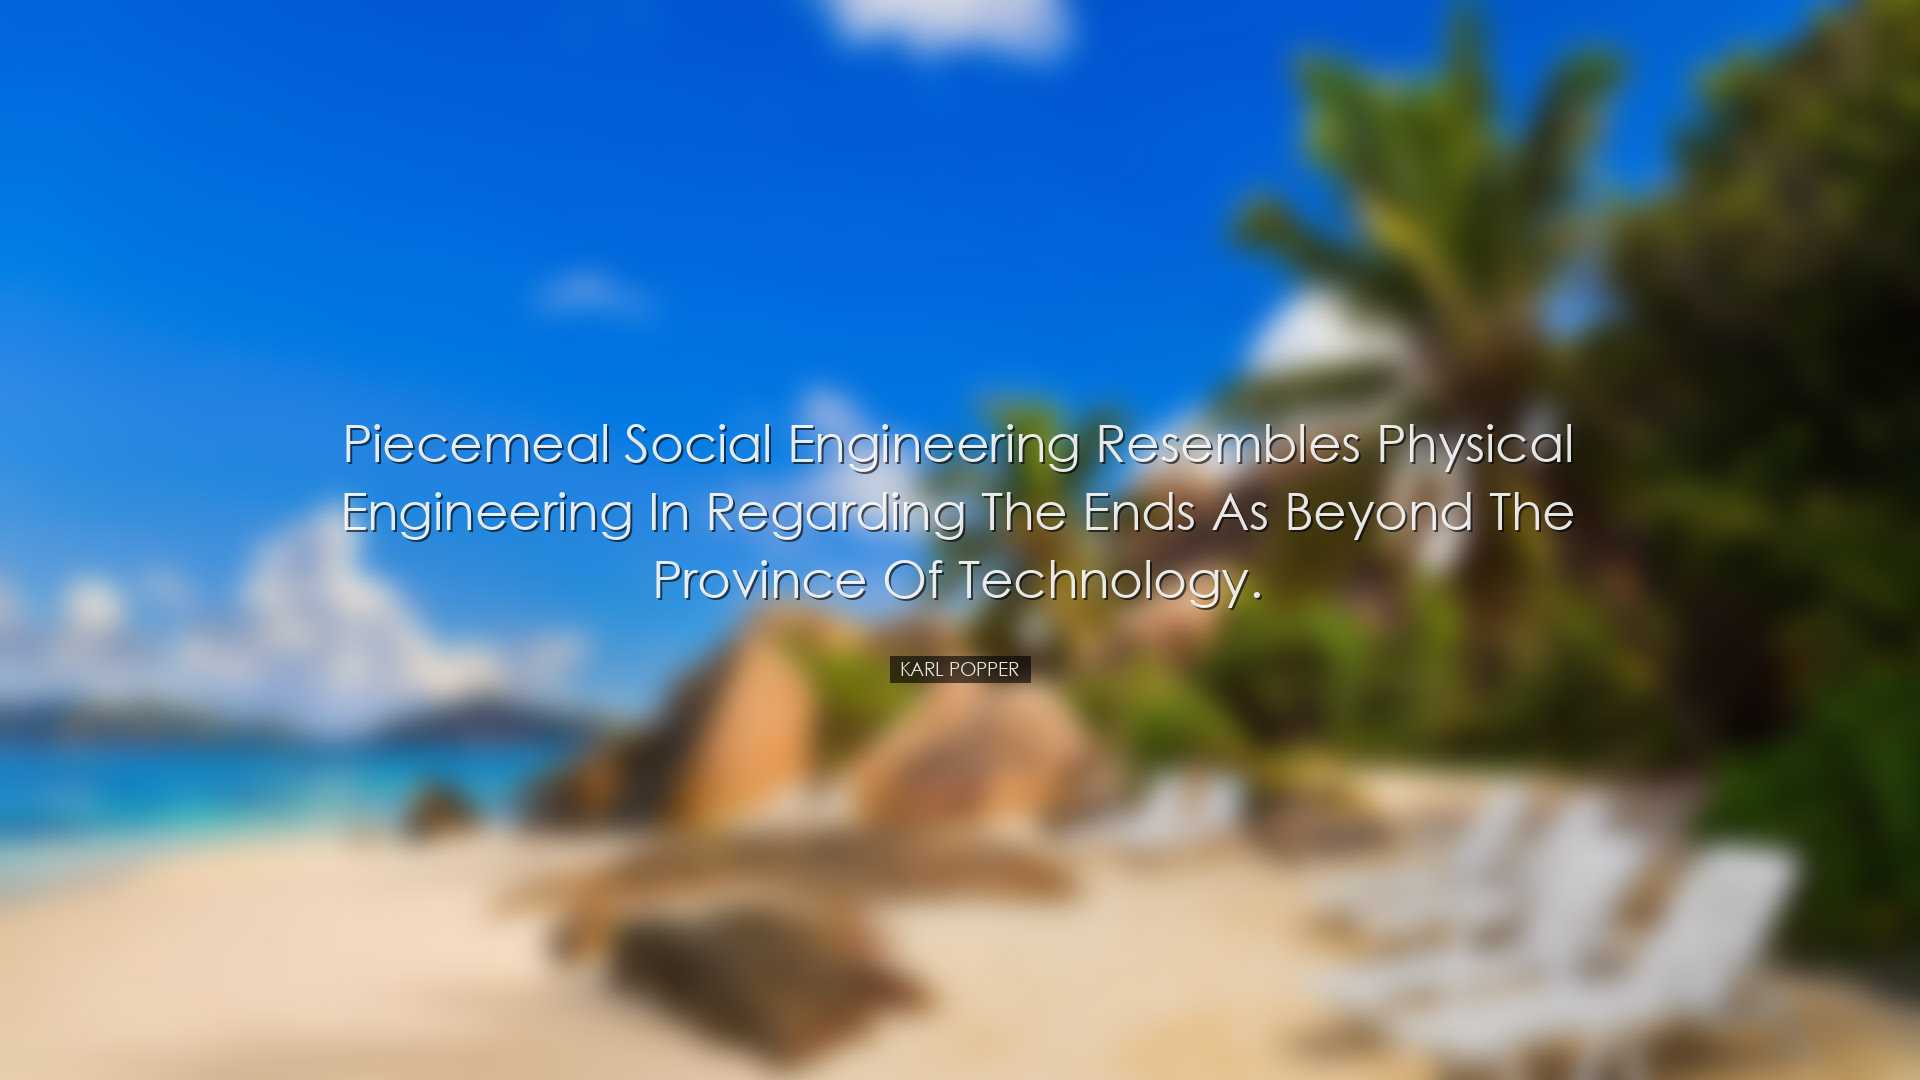 Piecemeal social engineering resembles physical engineering in reg